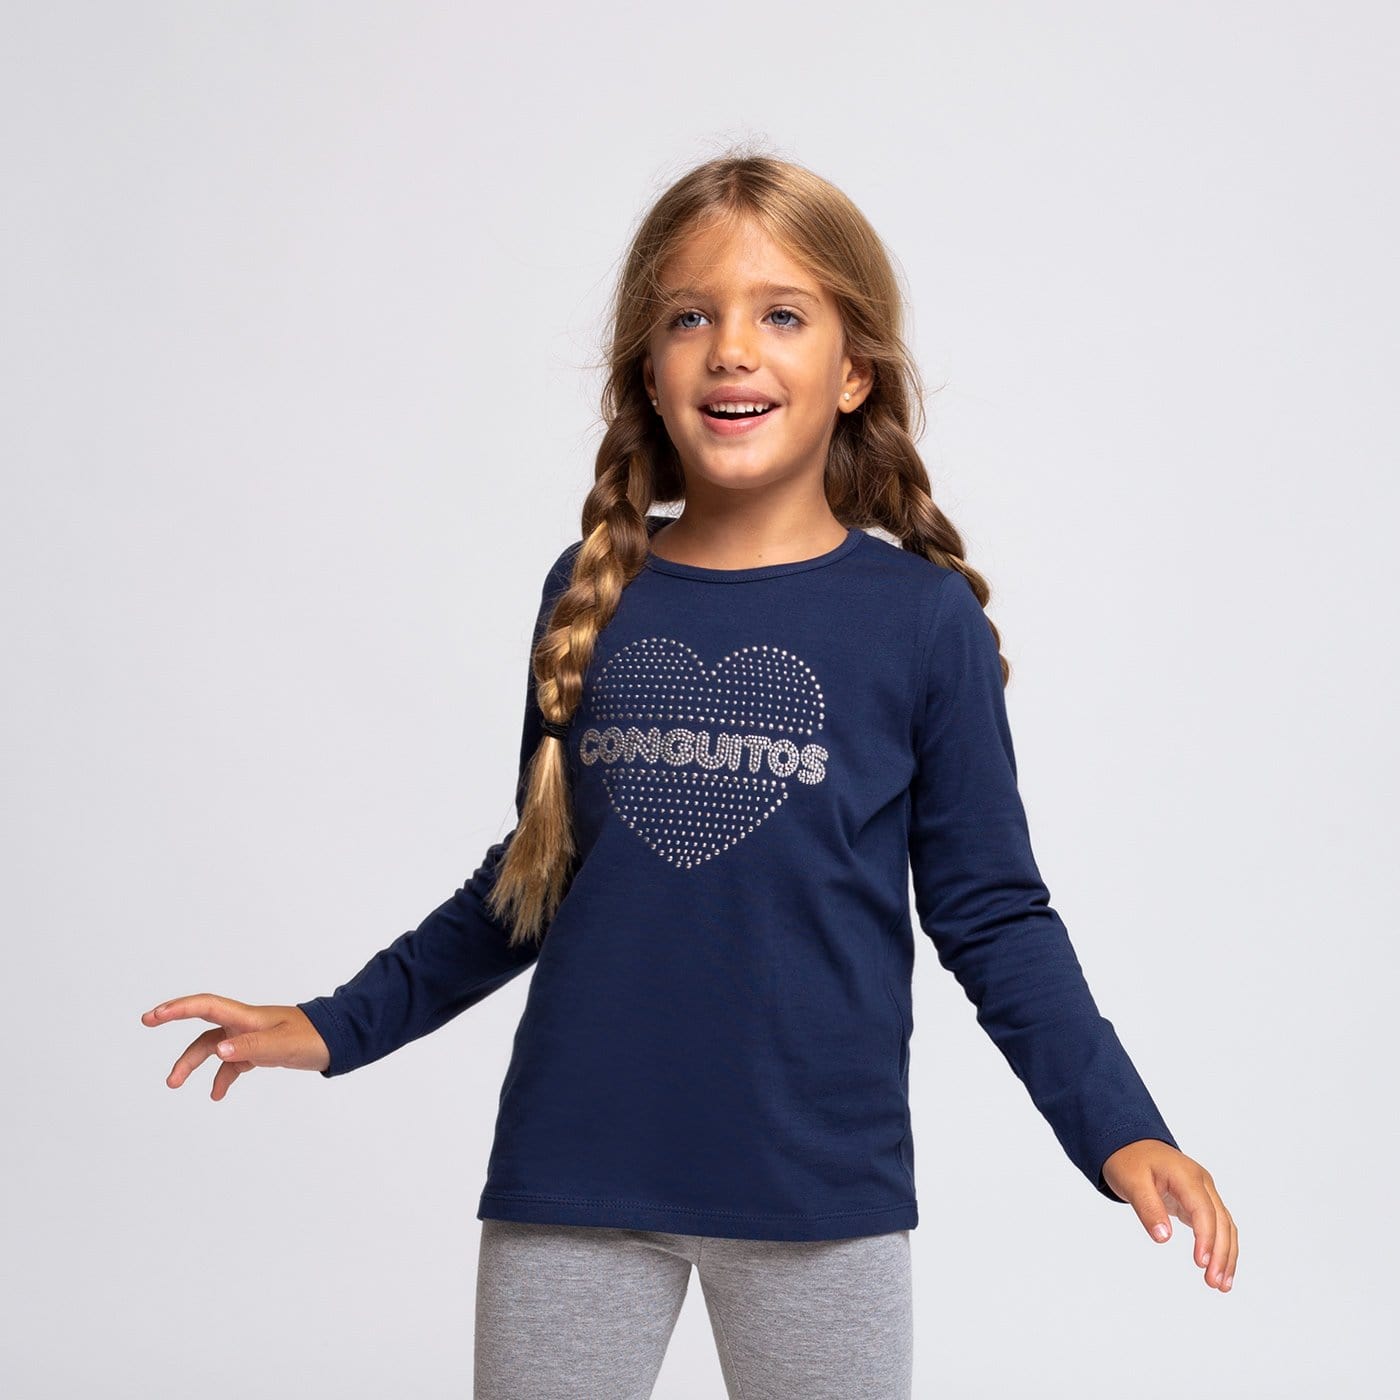 CONGUITOS TEXTIL Clothing Girl's Navy "Heart Strass" T-shirt